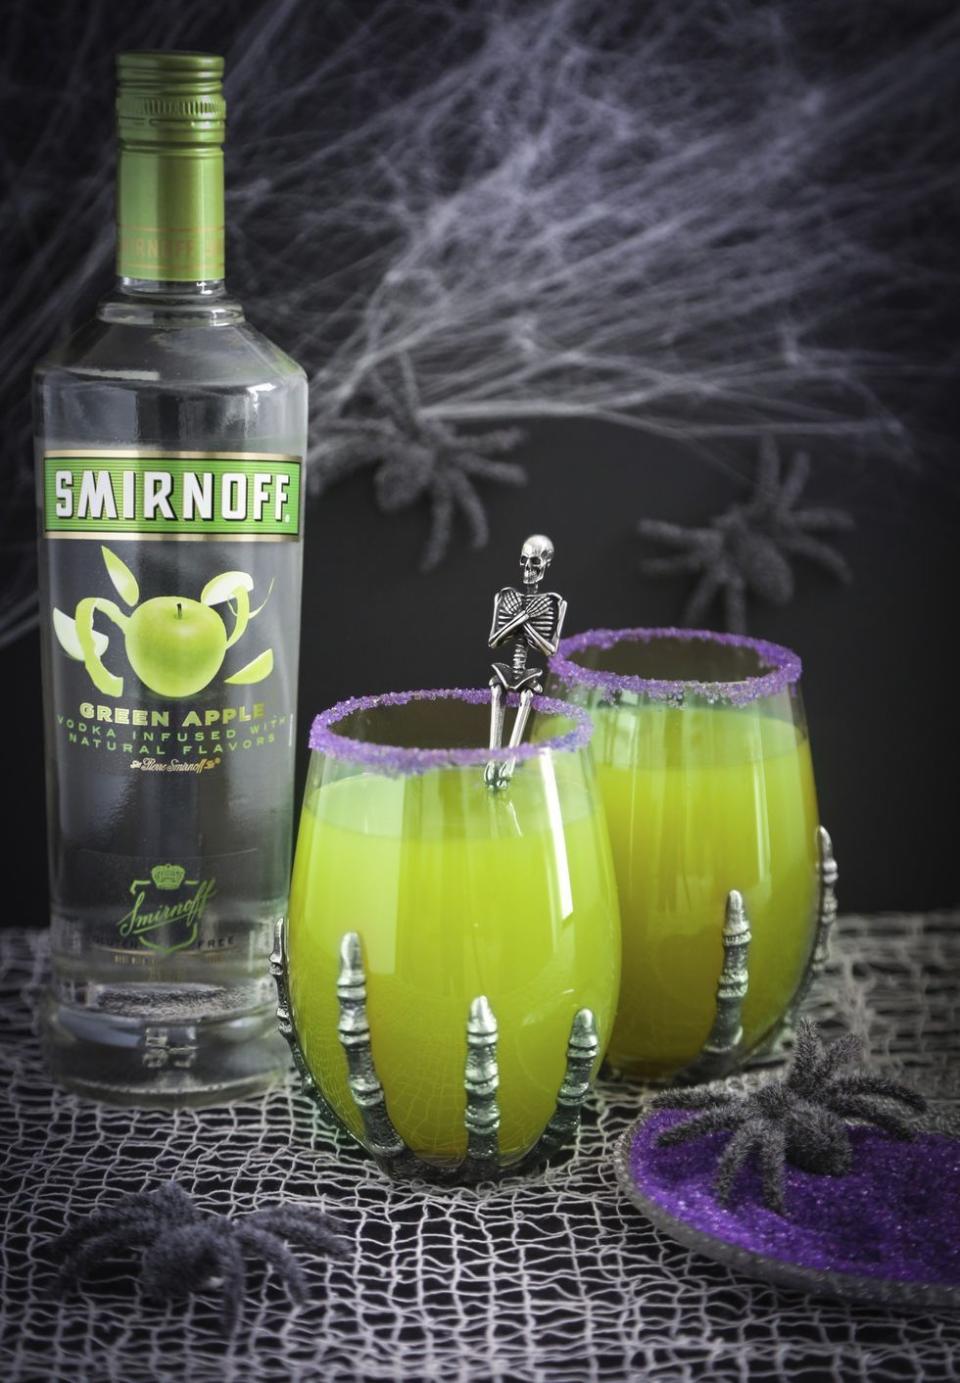 <p>drizly.com</p><p><strong>$21.99</strong></p><p>This Smirnoff cocktail kinda looks like Nickelodeon slime but, trust, it's delicious. Pour 3 oz. grape juice over ice in a glass rimmed with purple sanding sugar and mix in 5 oz. green apple vodka.</p><p><em>Recipe from Smirnoff.</em></p>